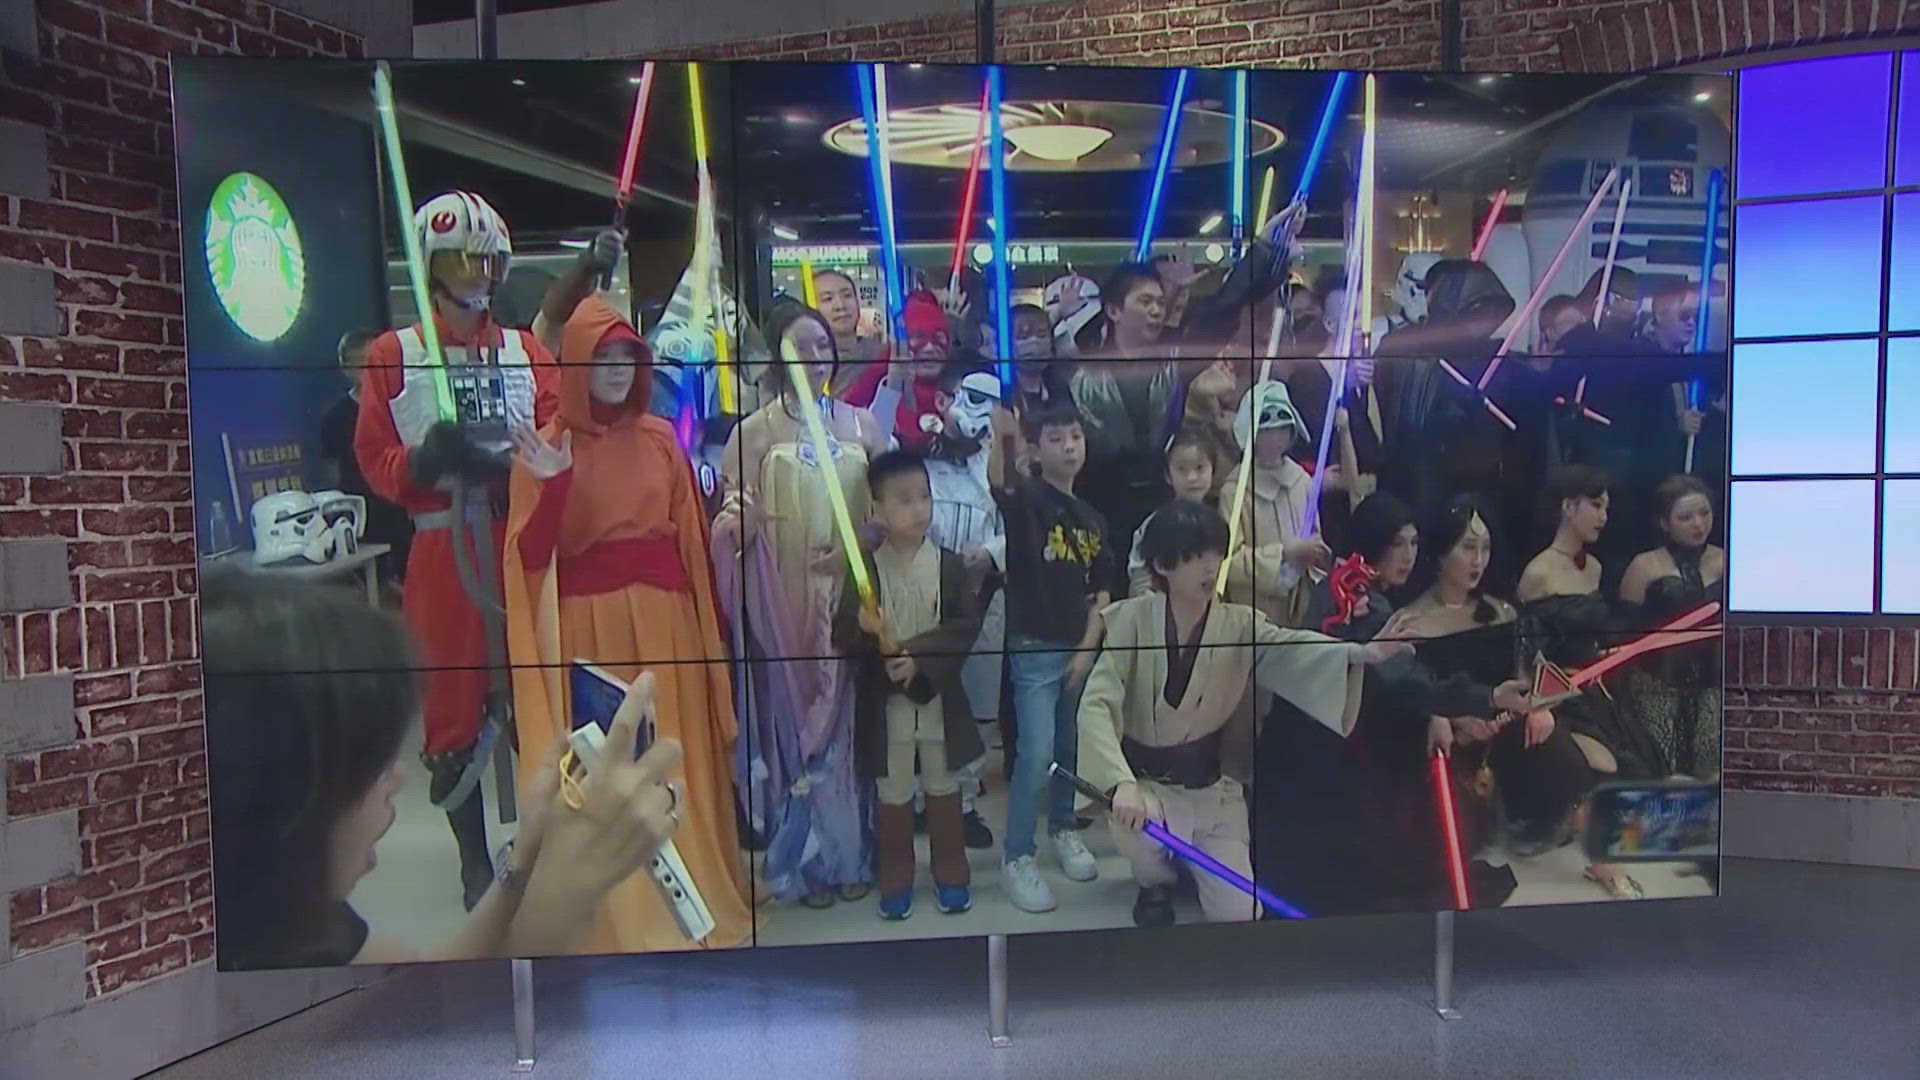 Fans of the movie franchise across the globe celebrate with costumed parties and festivals.